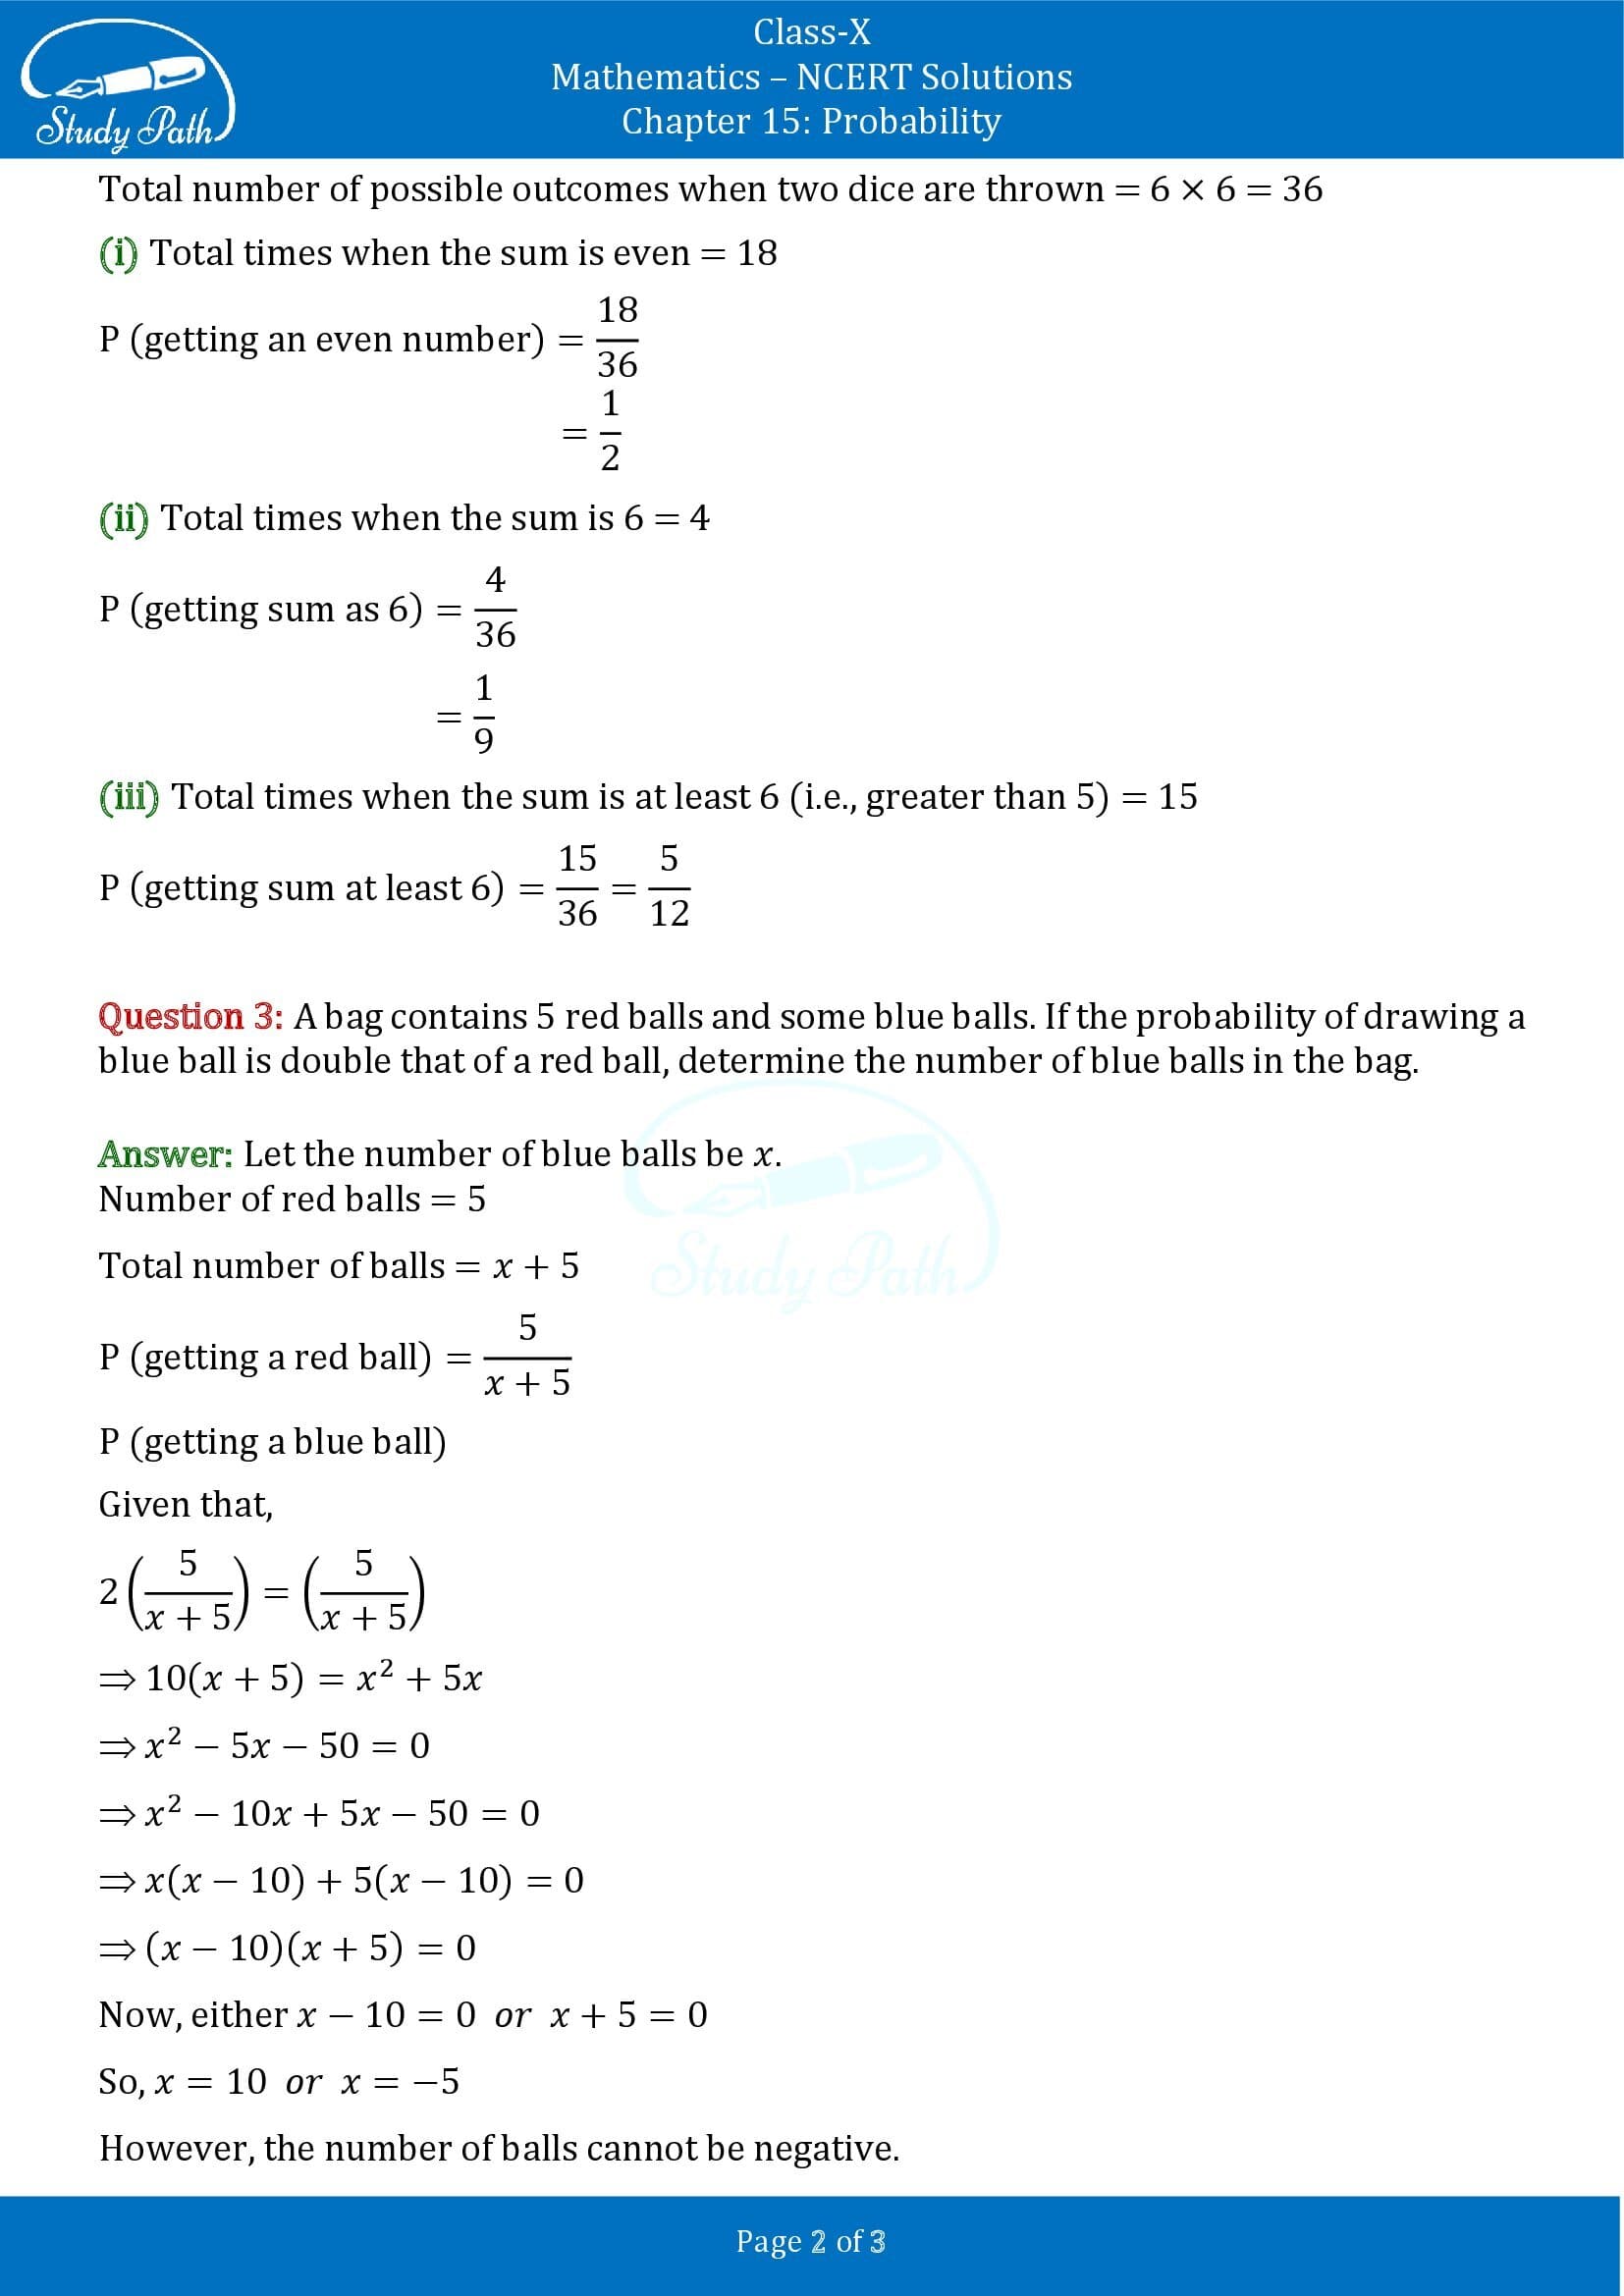 NCERT Solutions for Class 10 Maths Chapter 15 Probability Exercise 15.2 00002